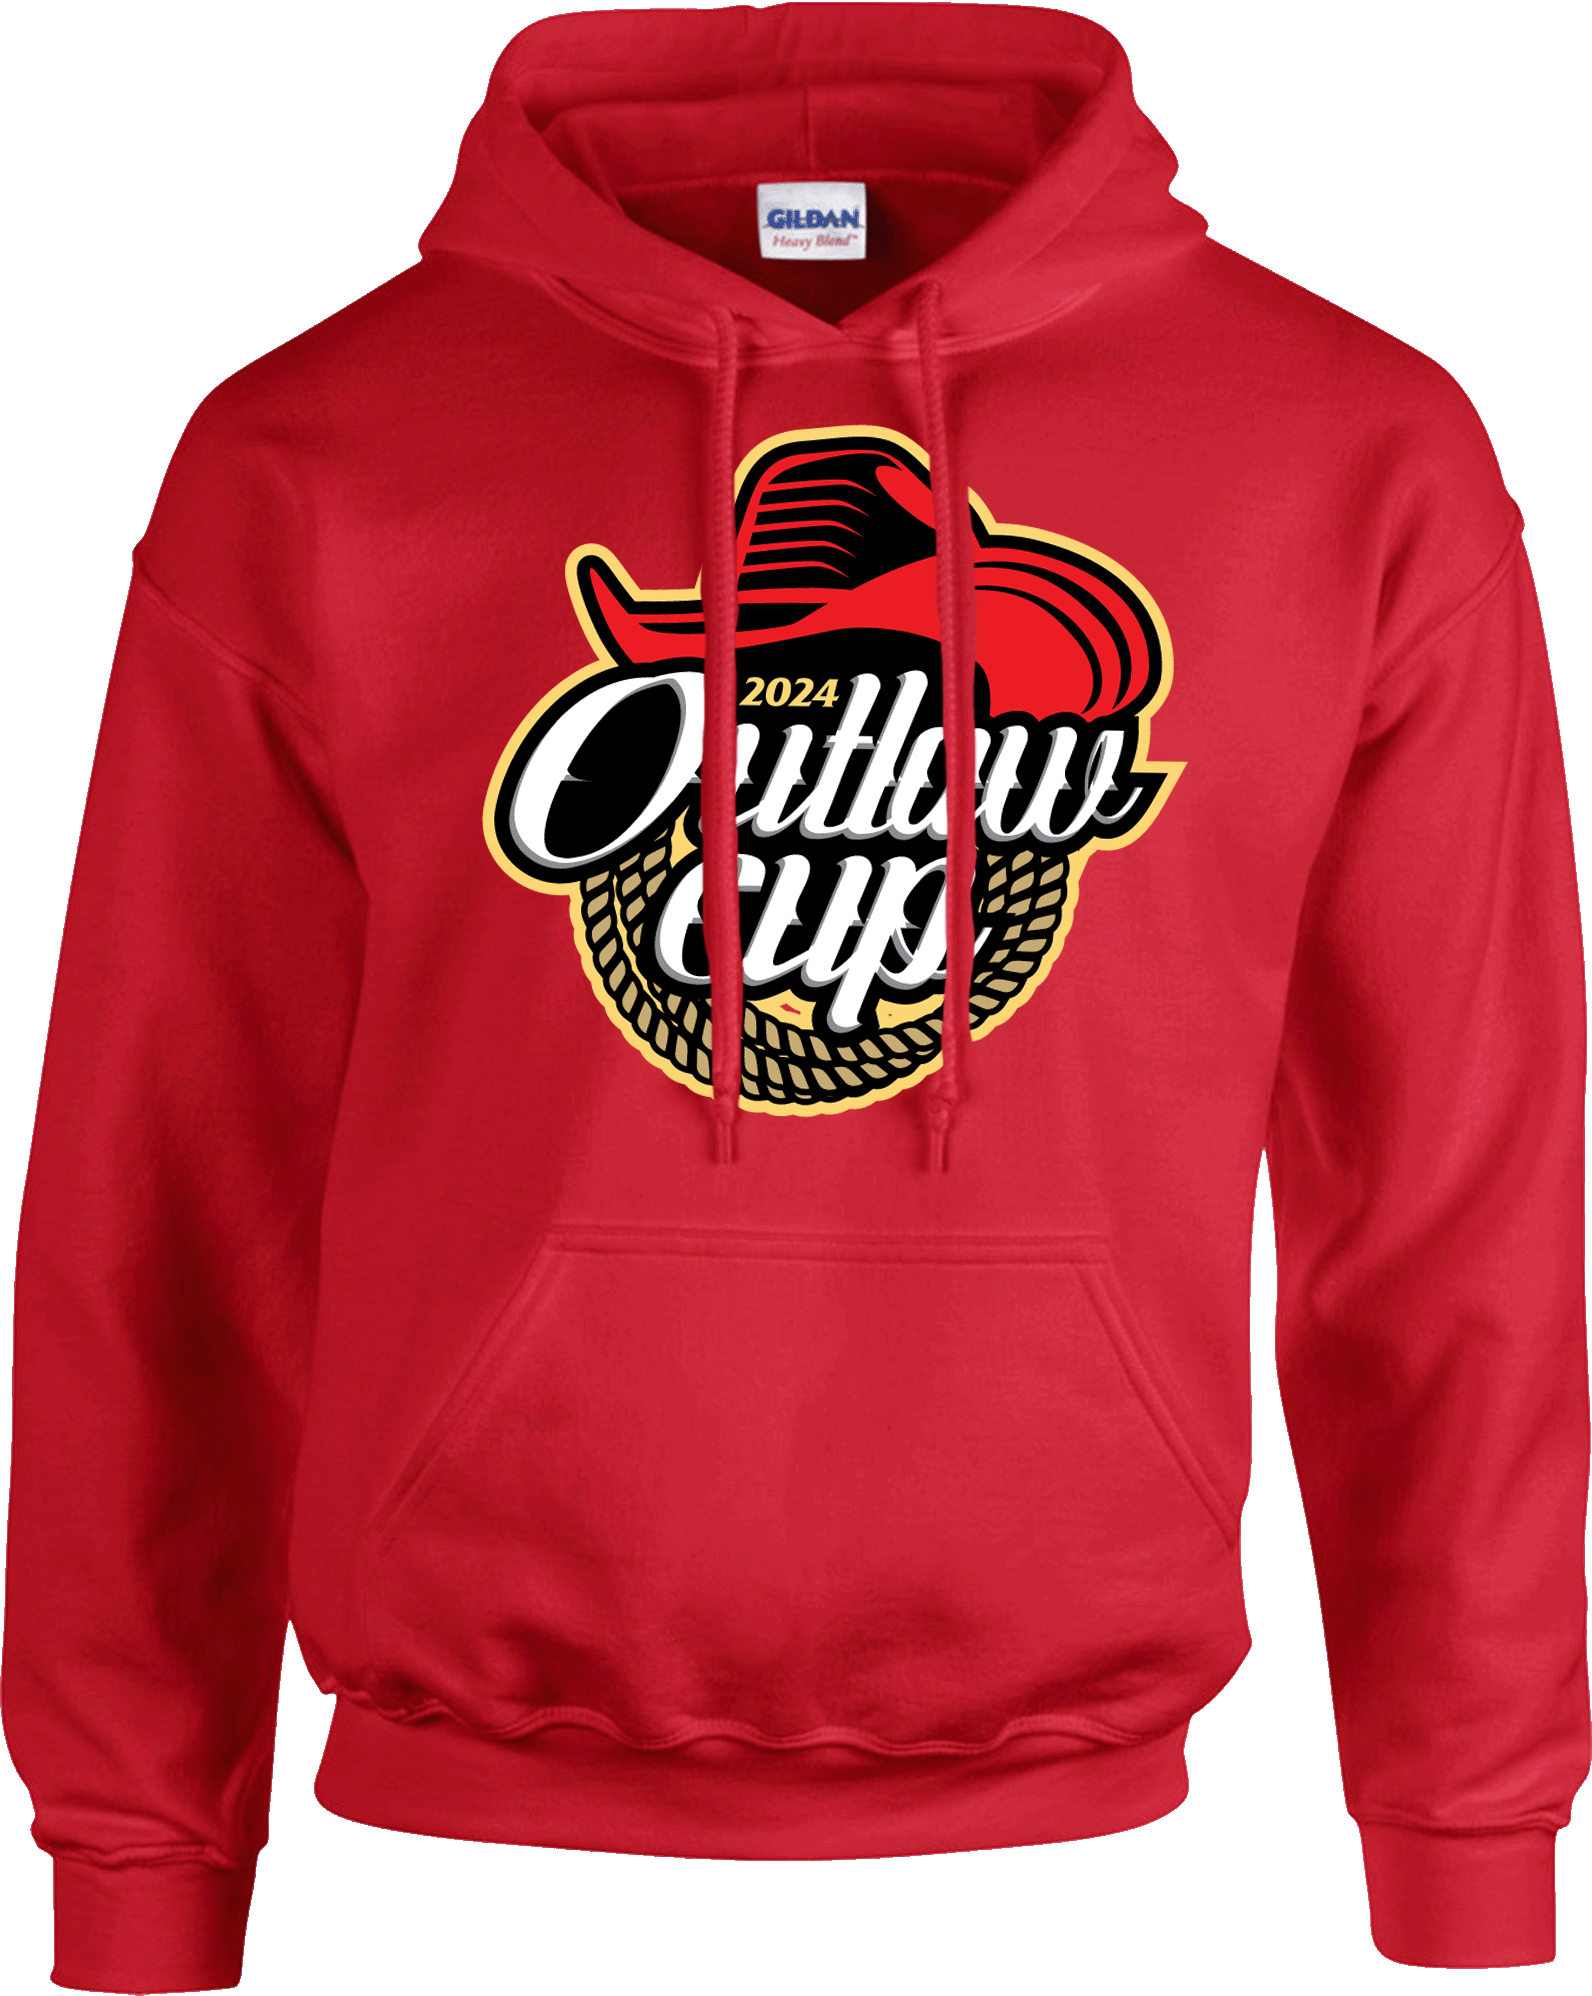 Hoodies - 2024 Outlaw Cup